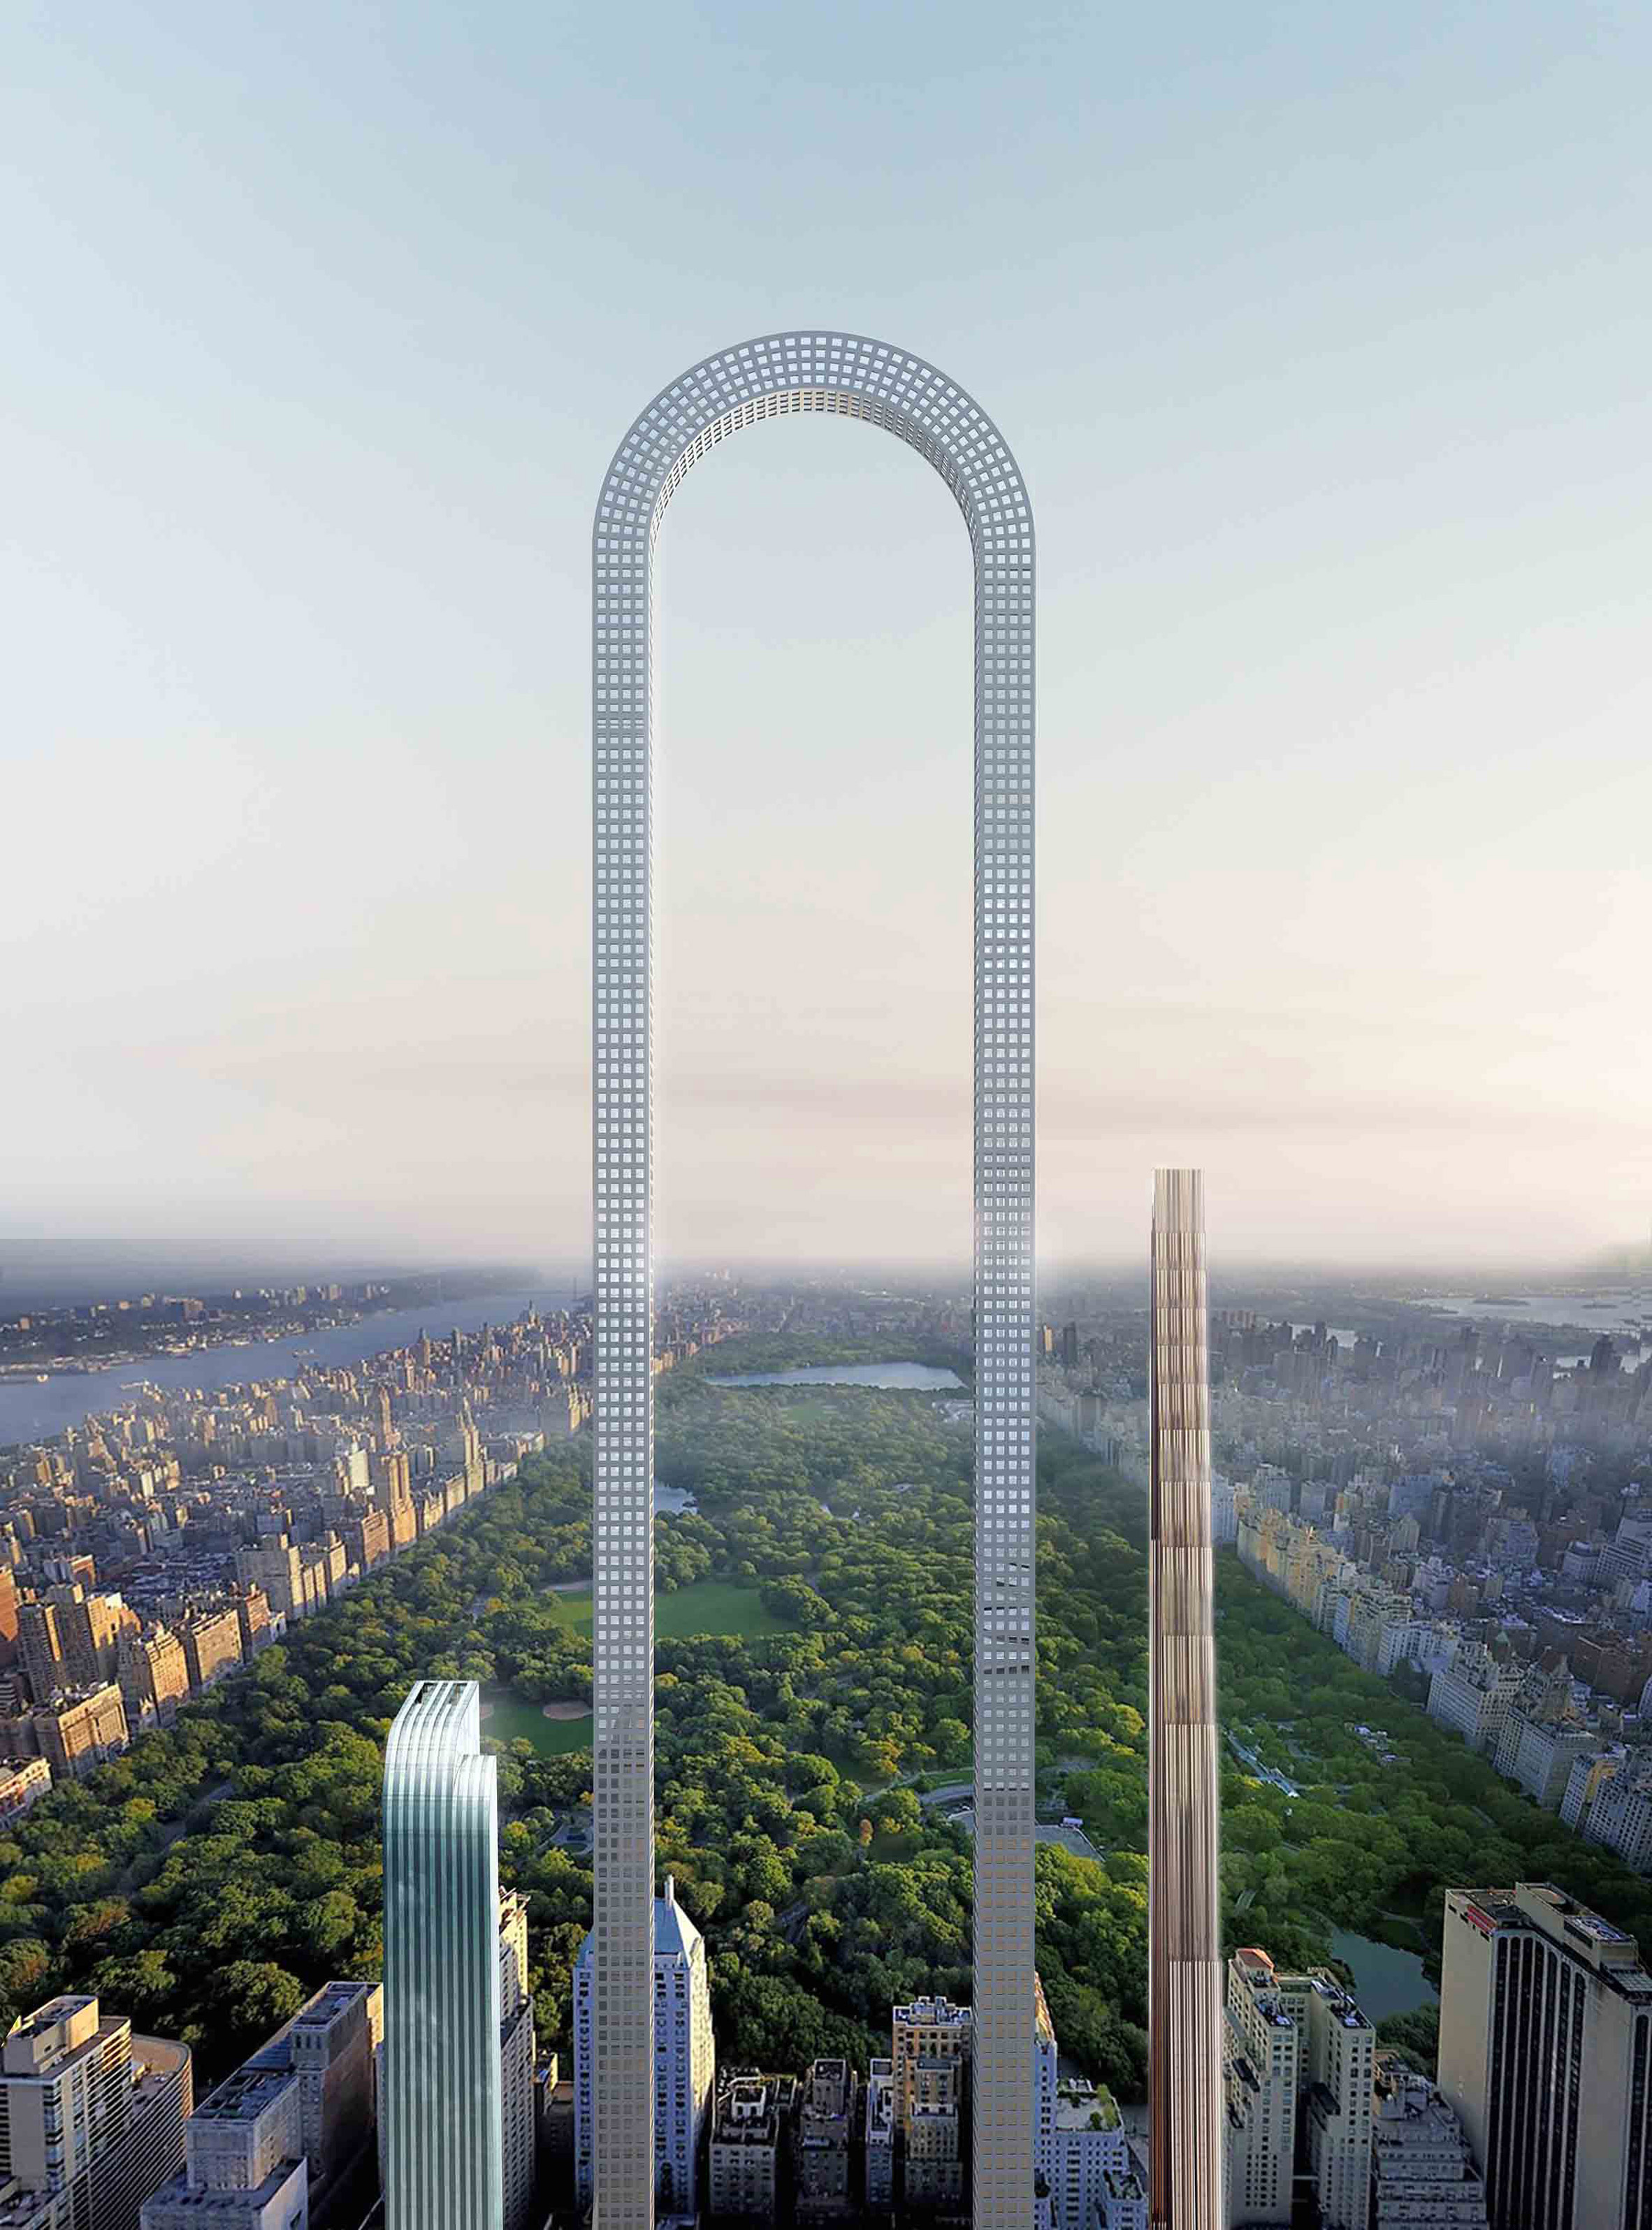 Artist's rendition of the Big Bend, the planned world's longest building